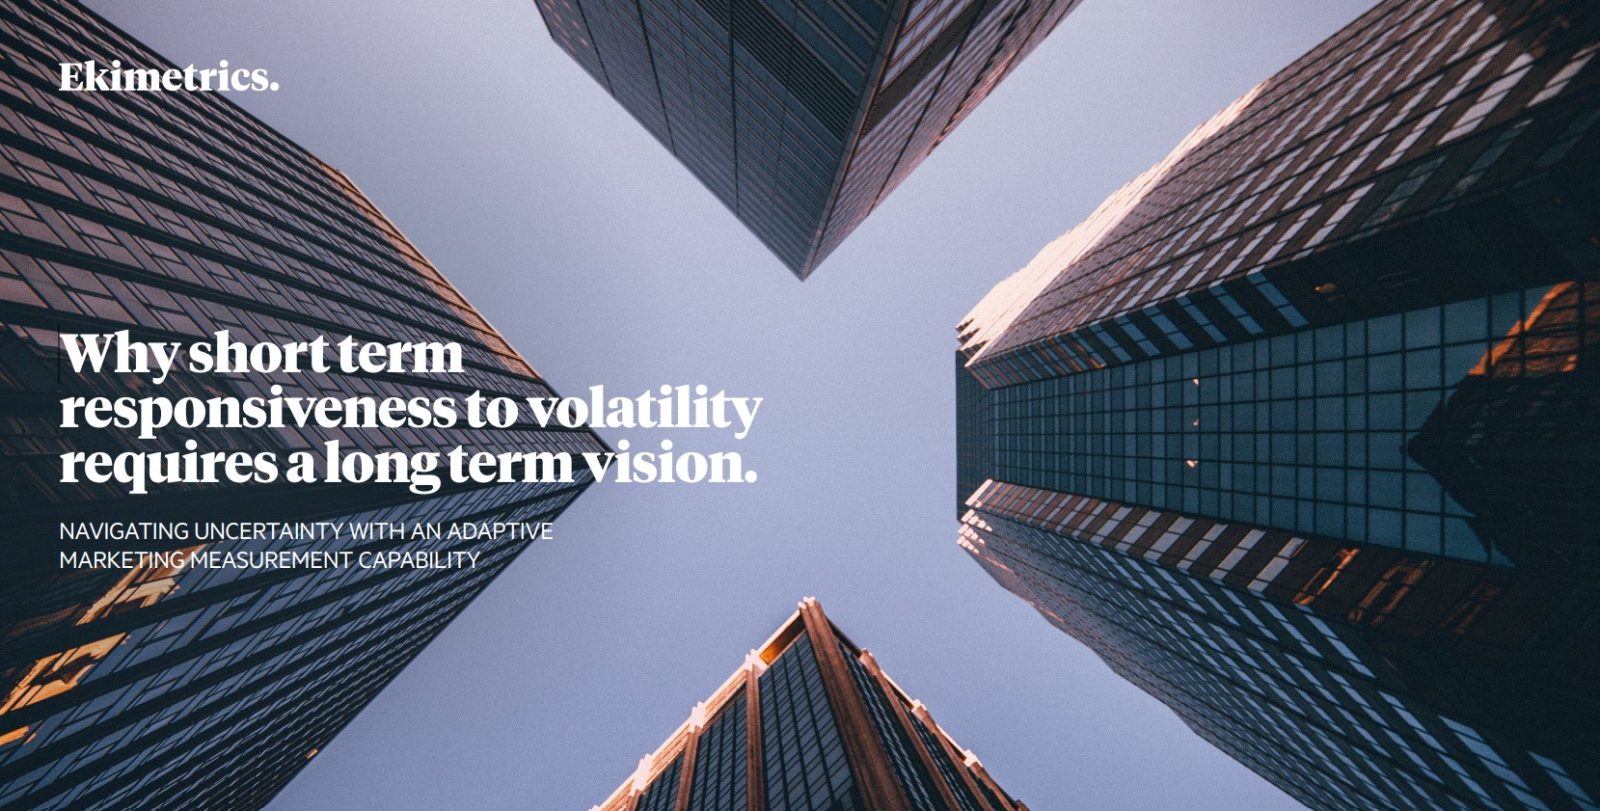 Why short term responsiveness to volatility requires a long term vision